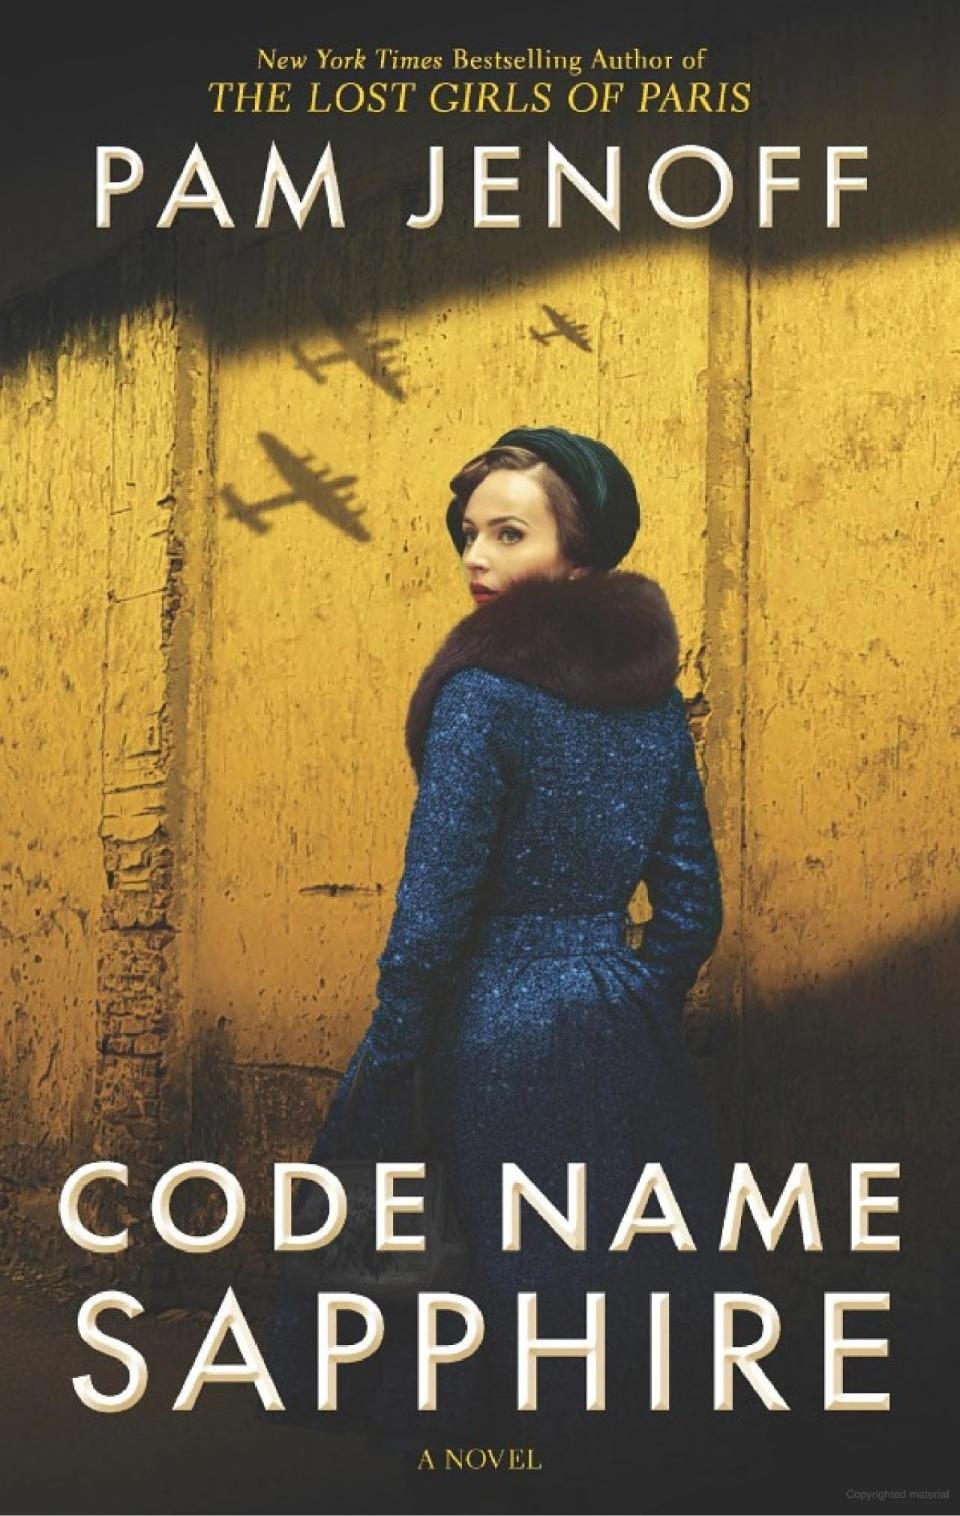 "Code Name Sapphire," by Pam Jenoff